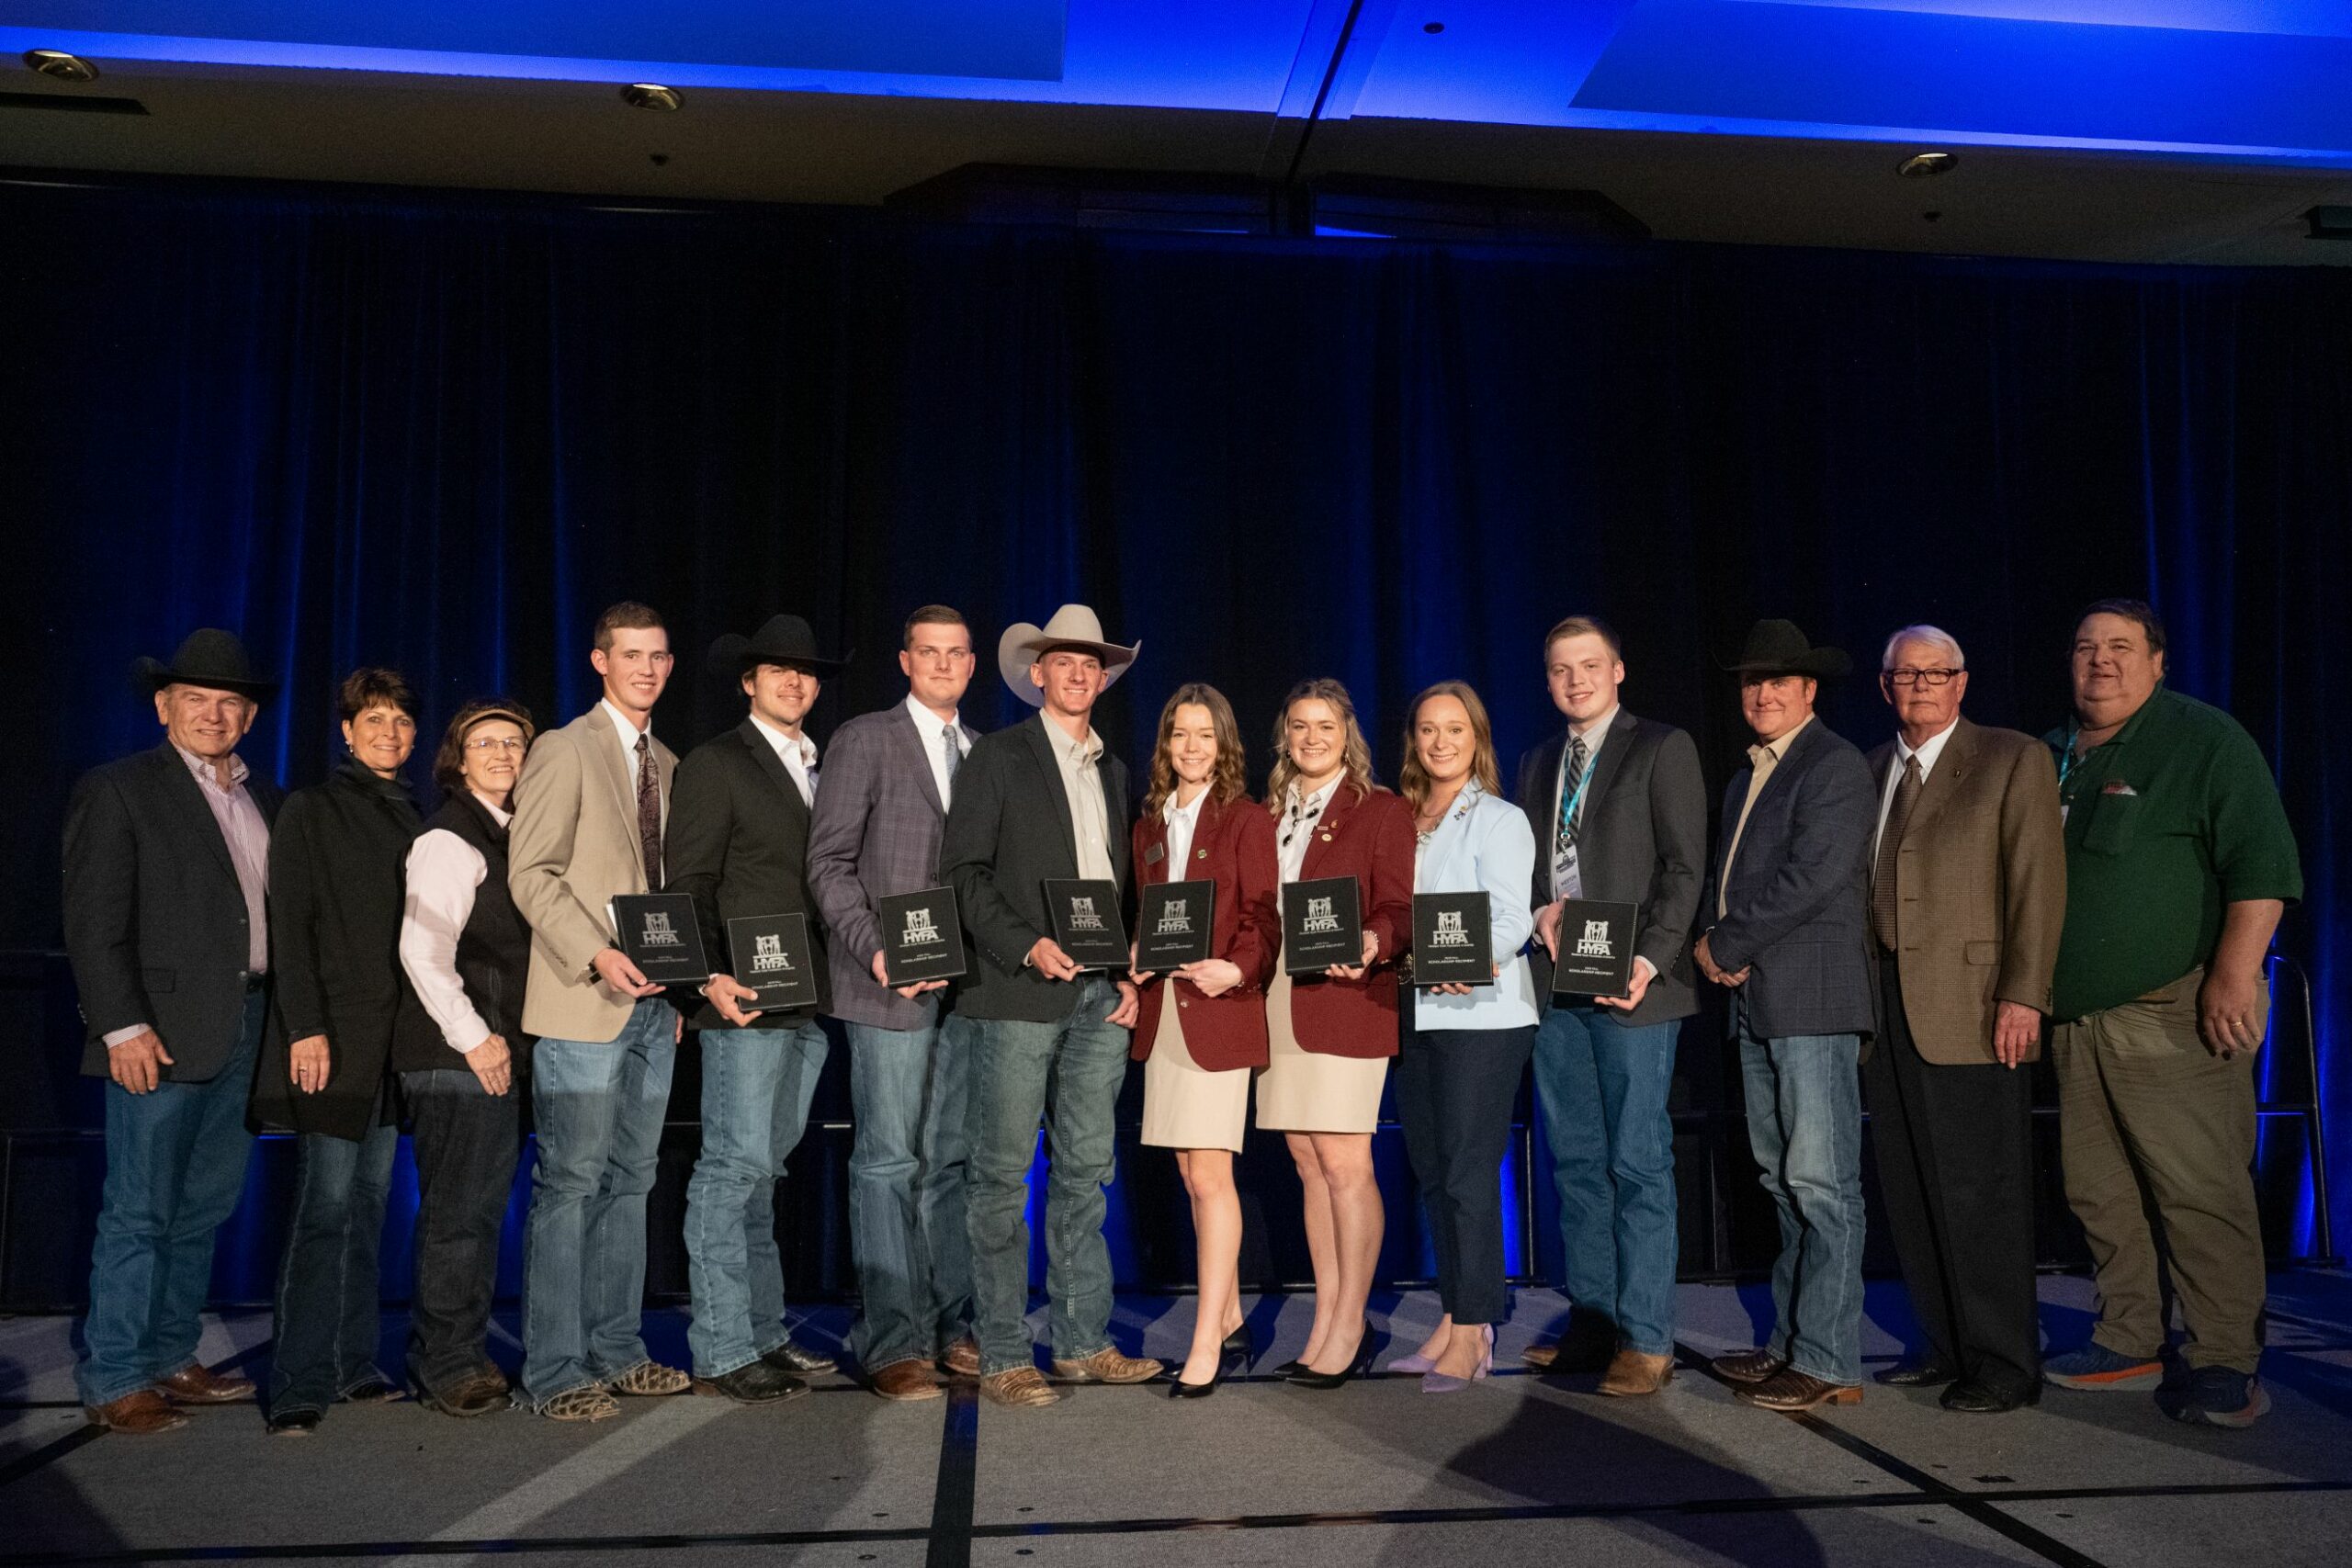 Hereford Juniors Awarded over $180,000 at the AHA Annual Meeting